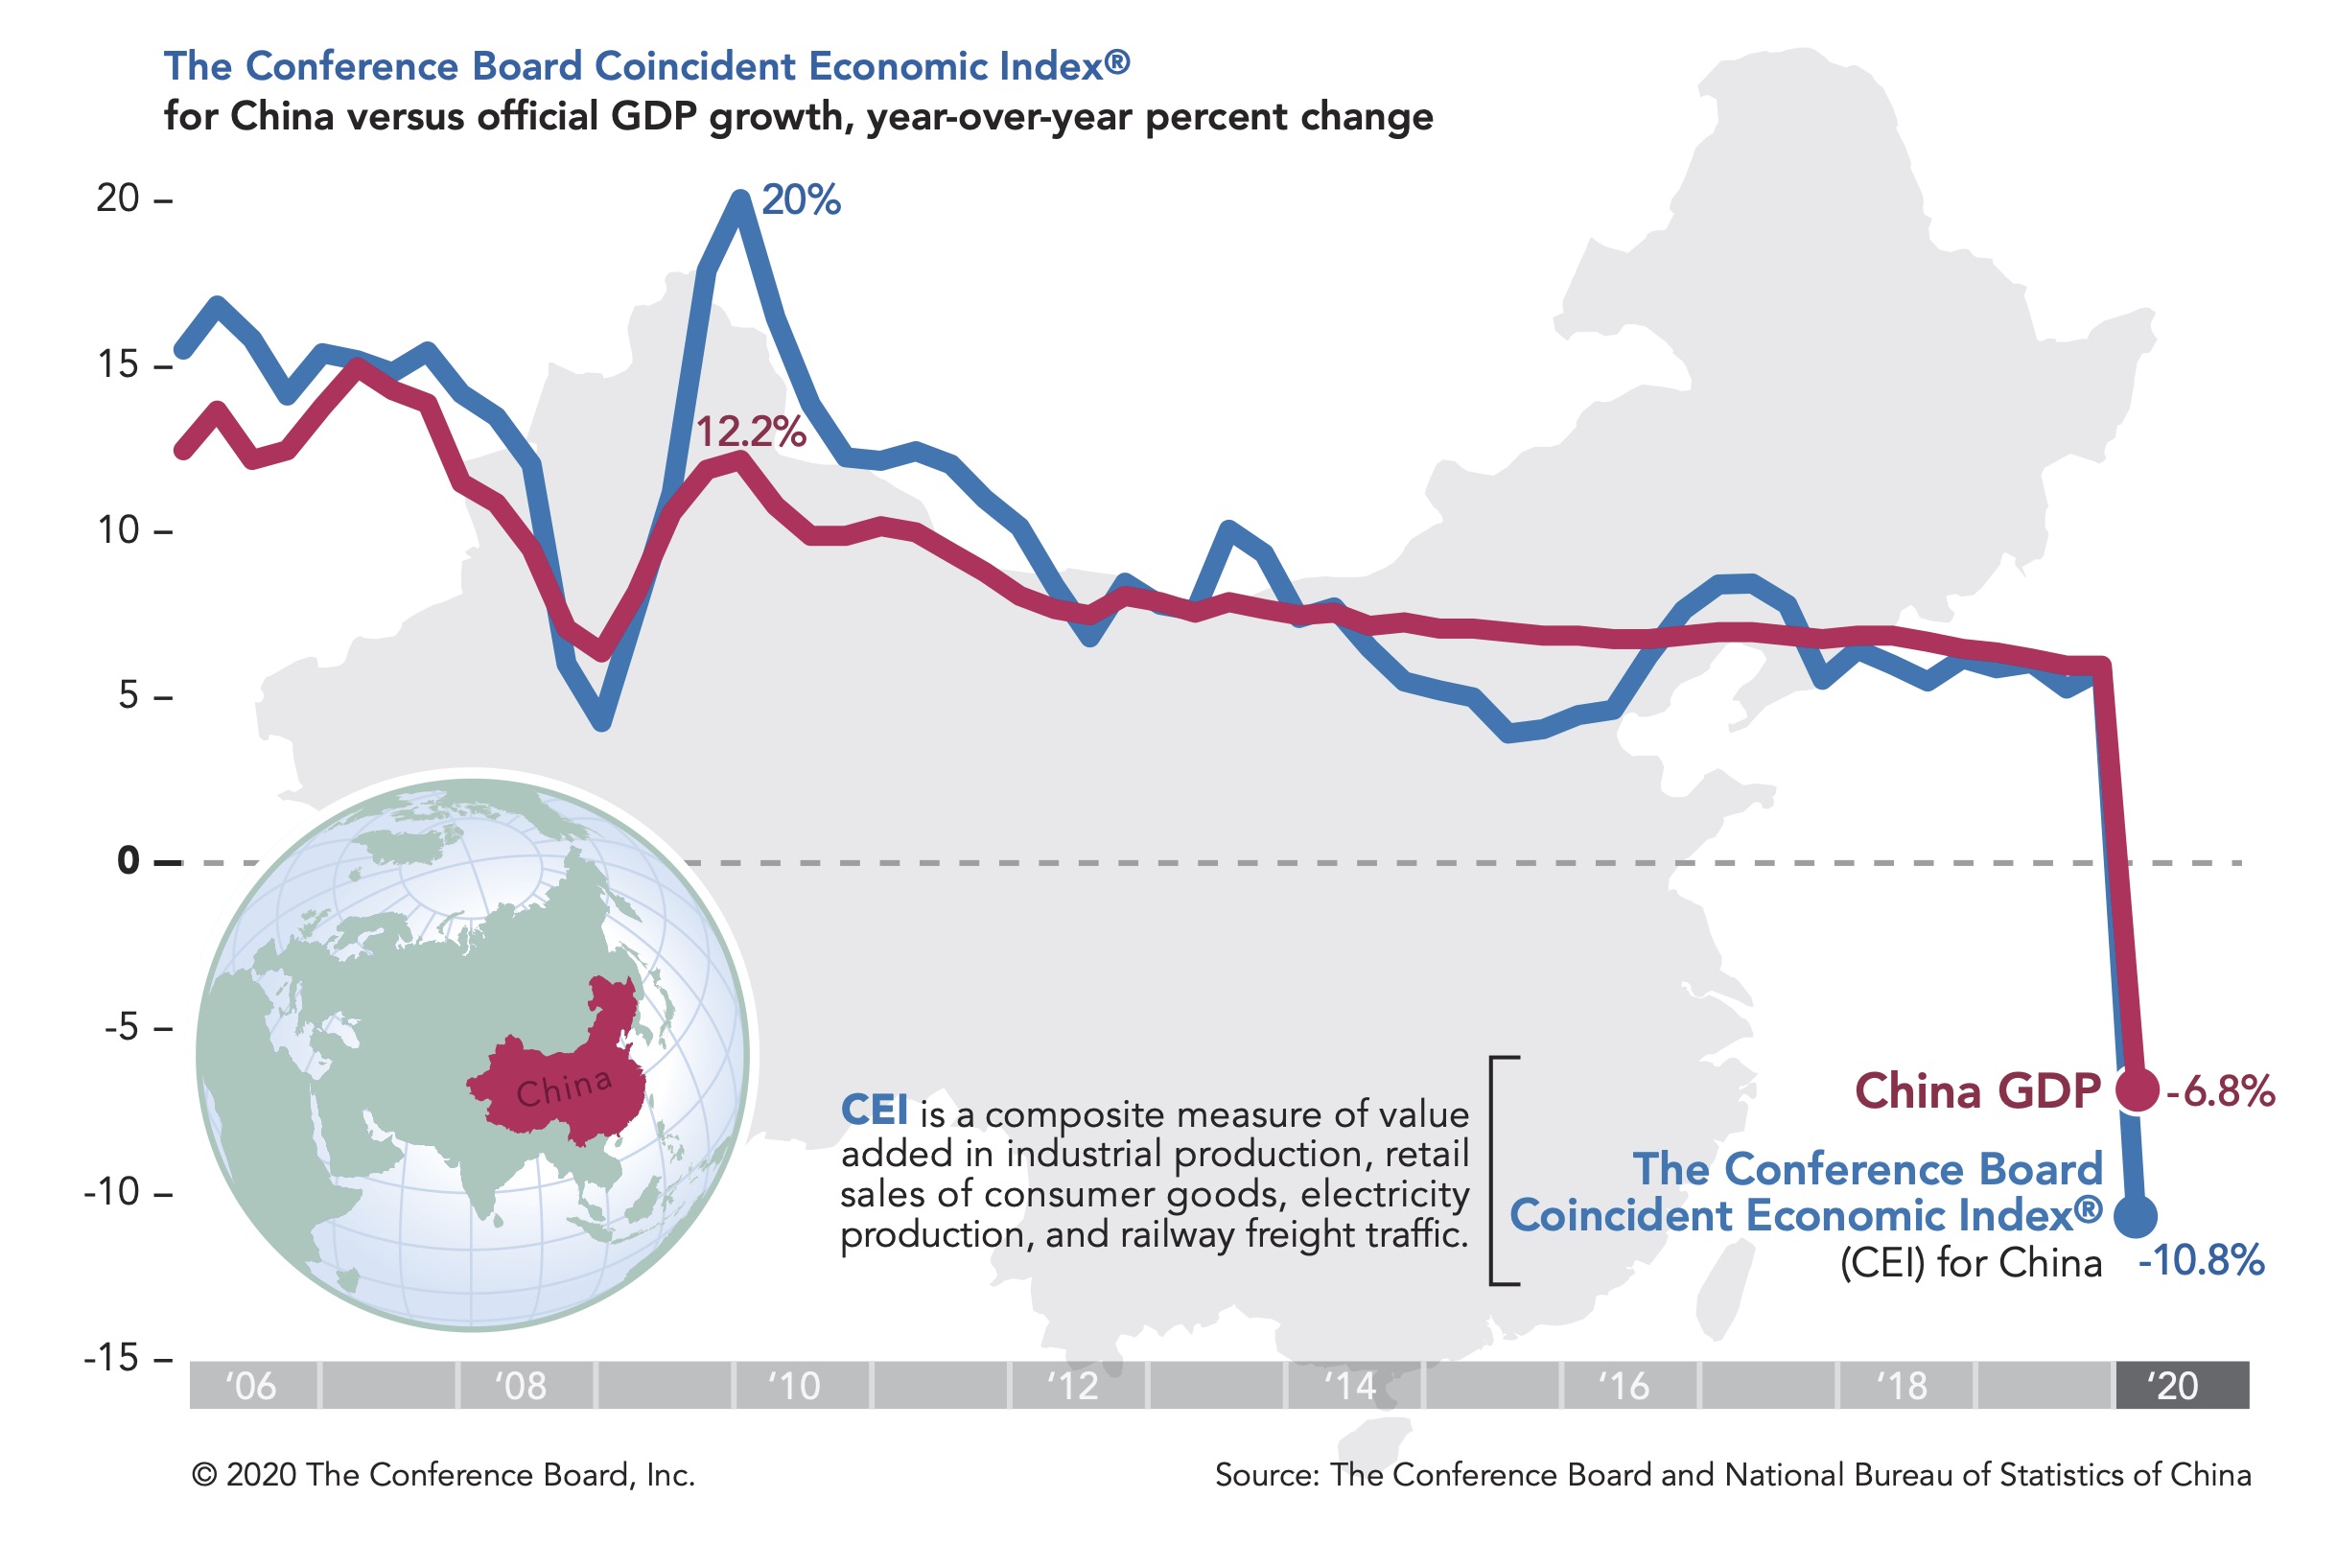 COVID-19’s impact in China: Business activity shows deeper drop than GDP